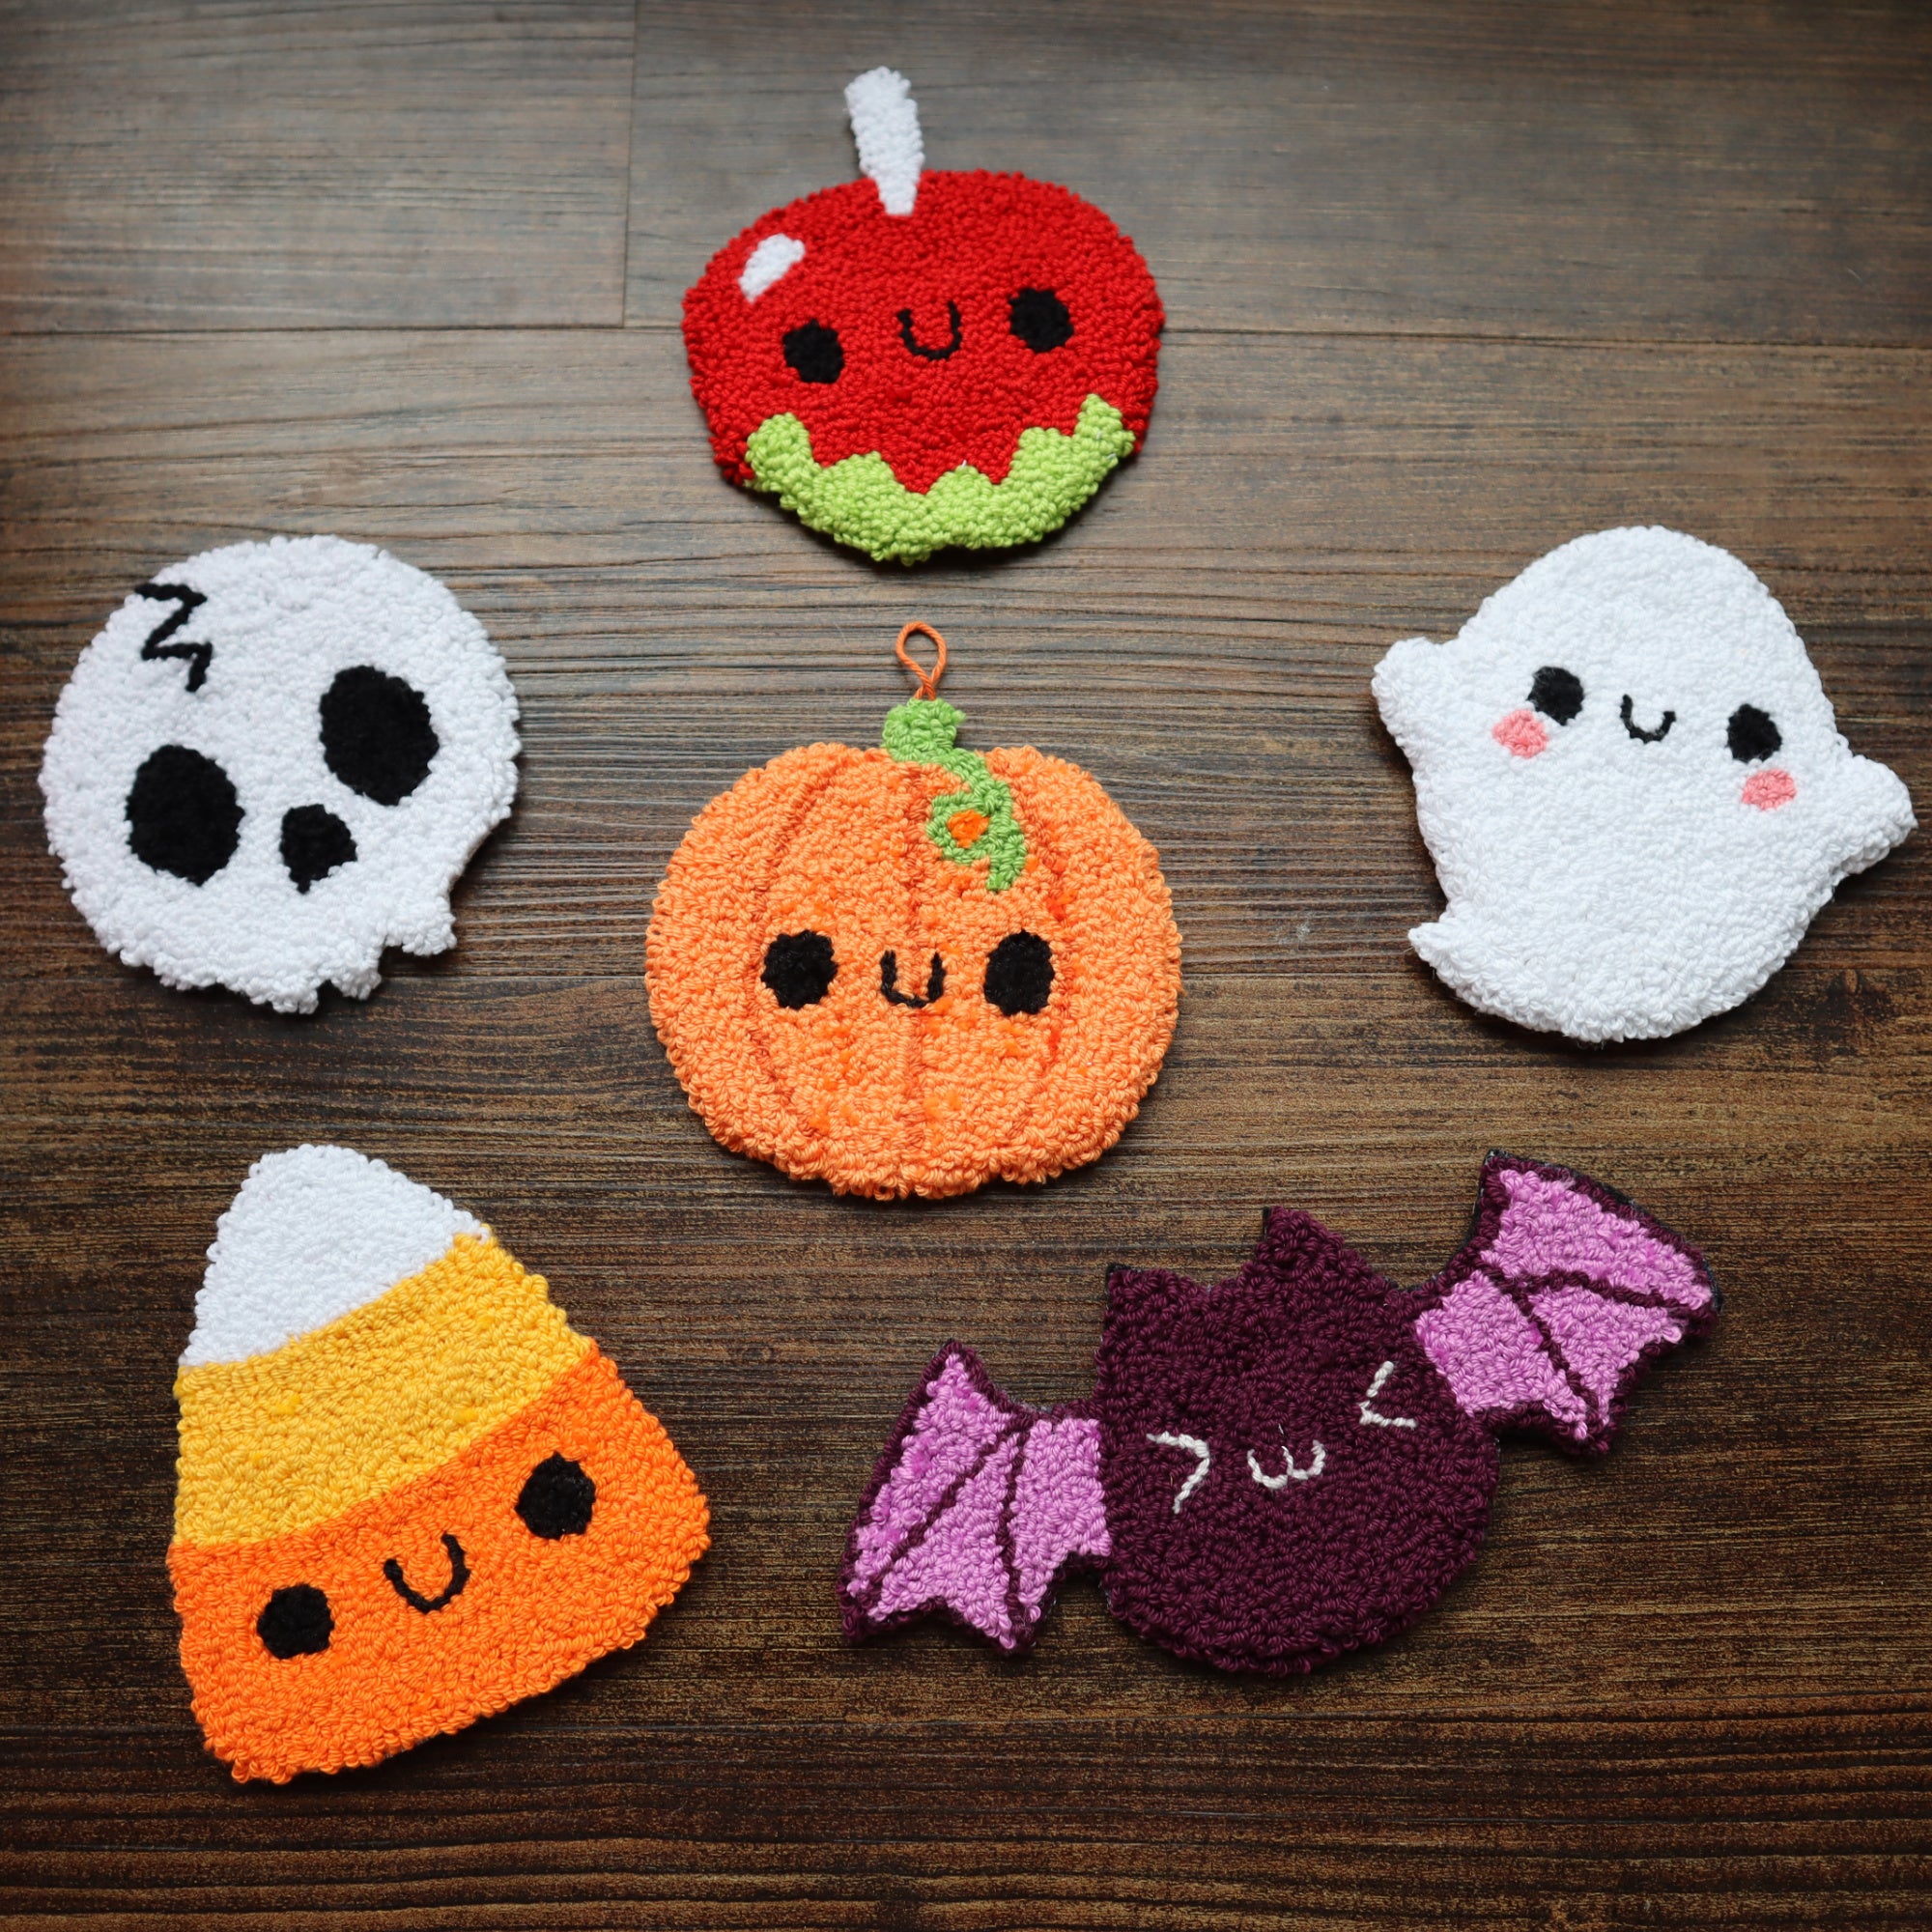 Cute Halloween Punch Needle Ornament Patterns | Punch Needle Embroidery Pattern